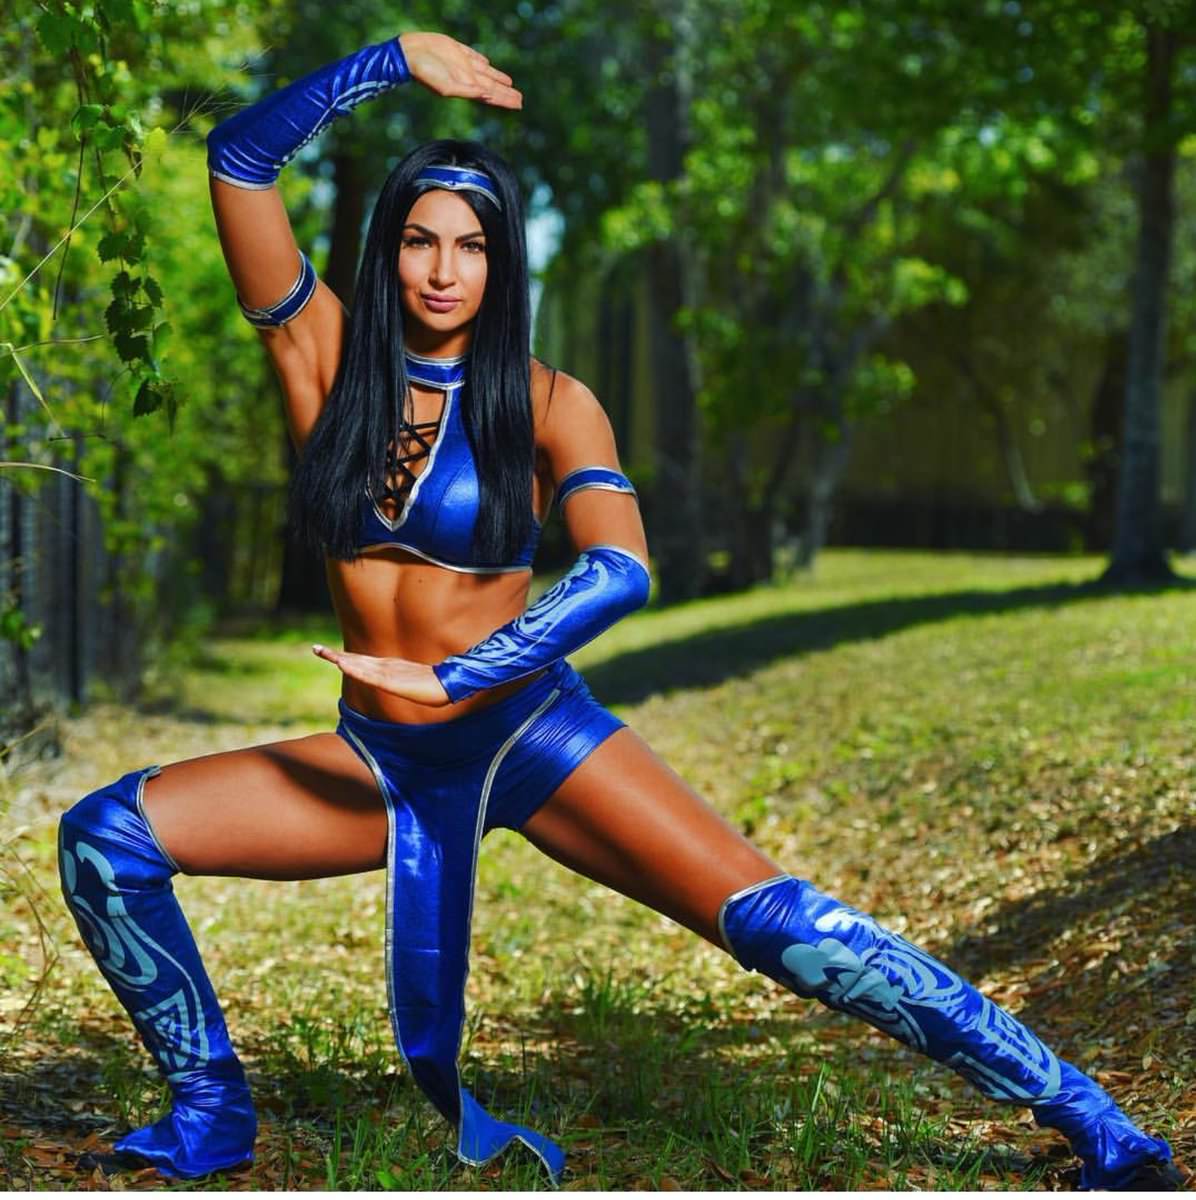 Billie Kay legs awesome pictures